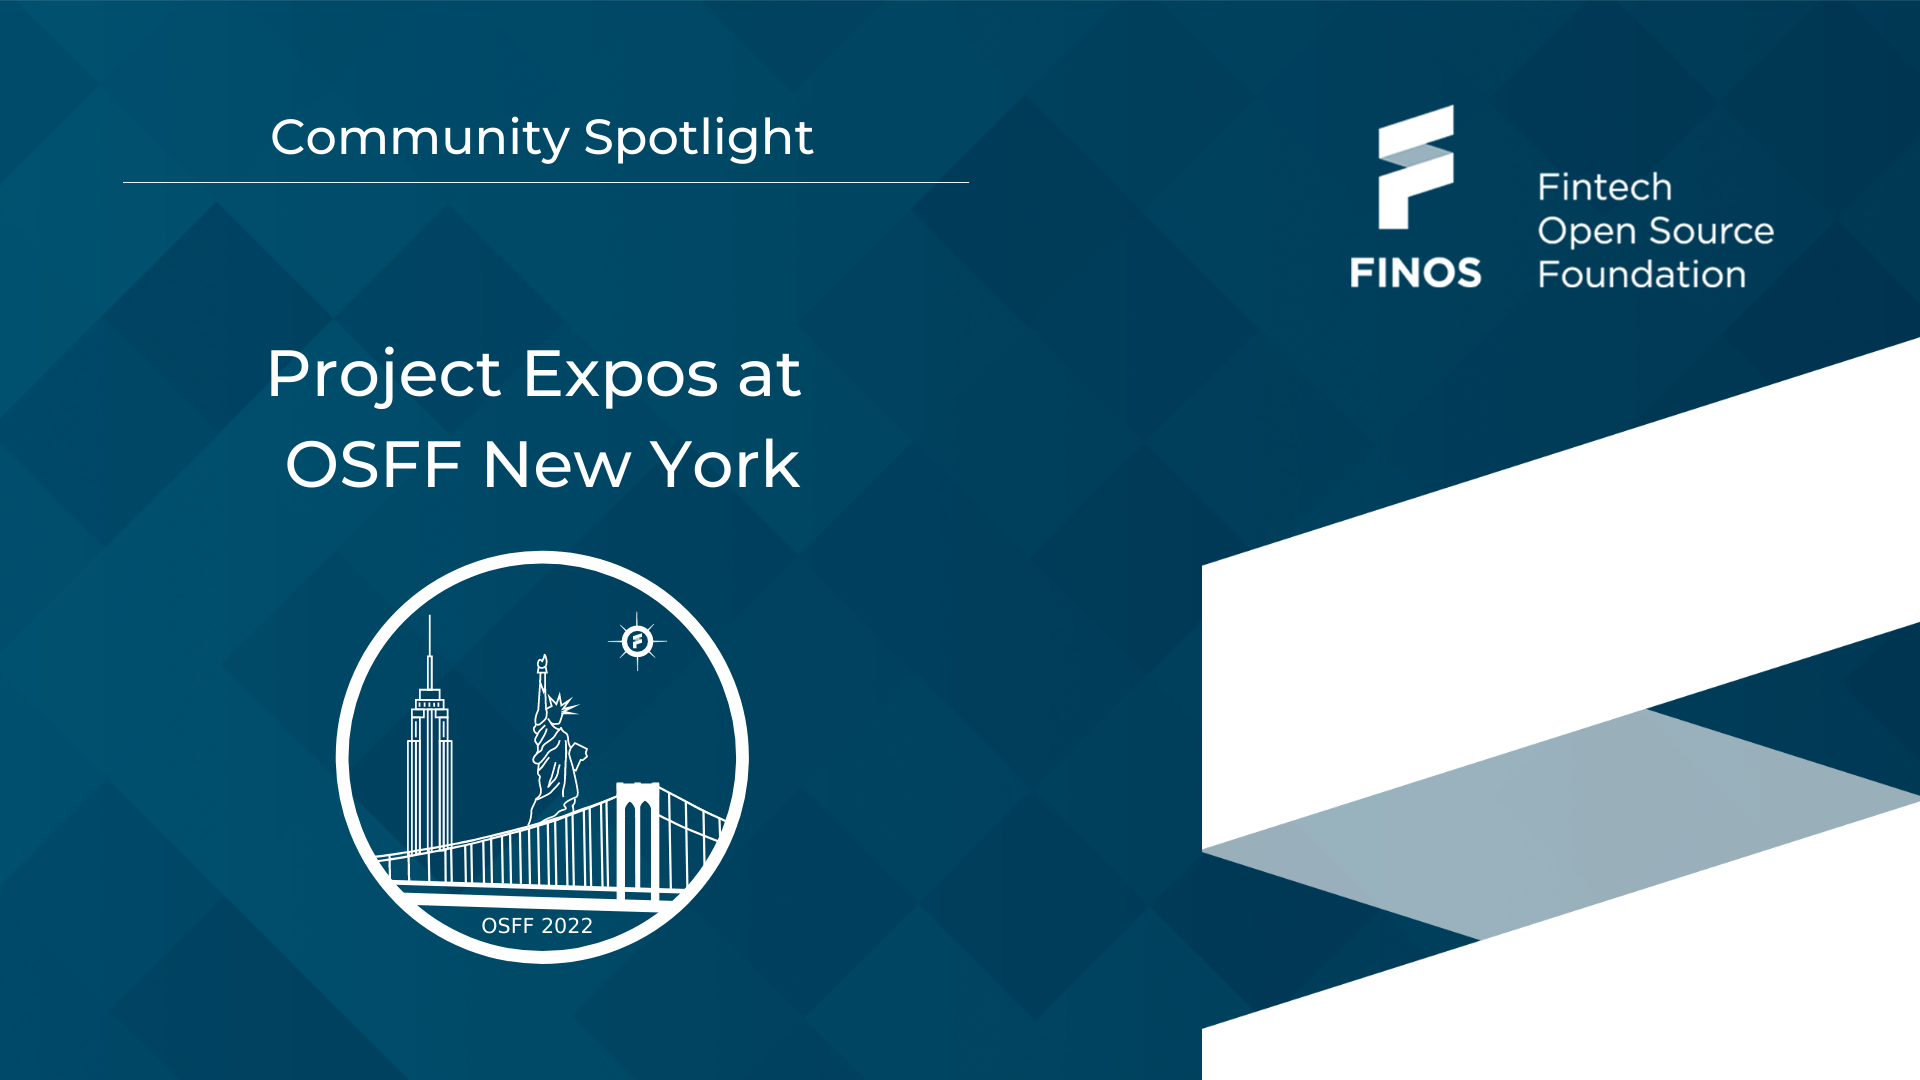 Project Expos at OSFF New York - February 2023